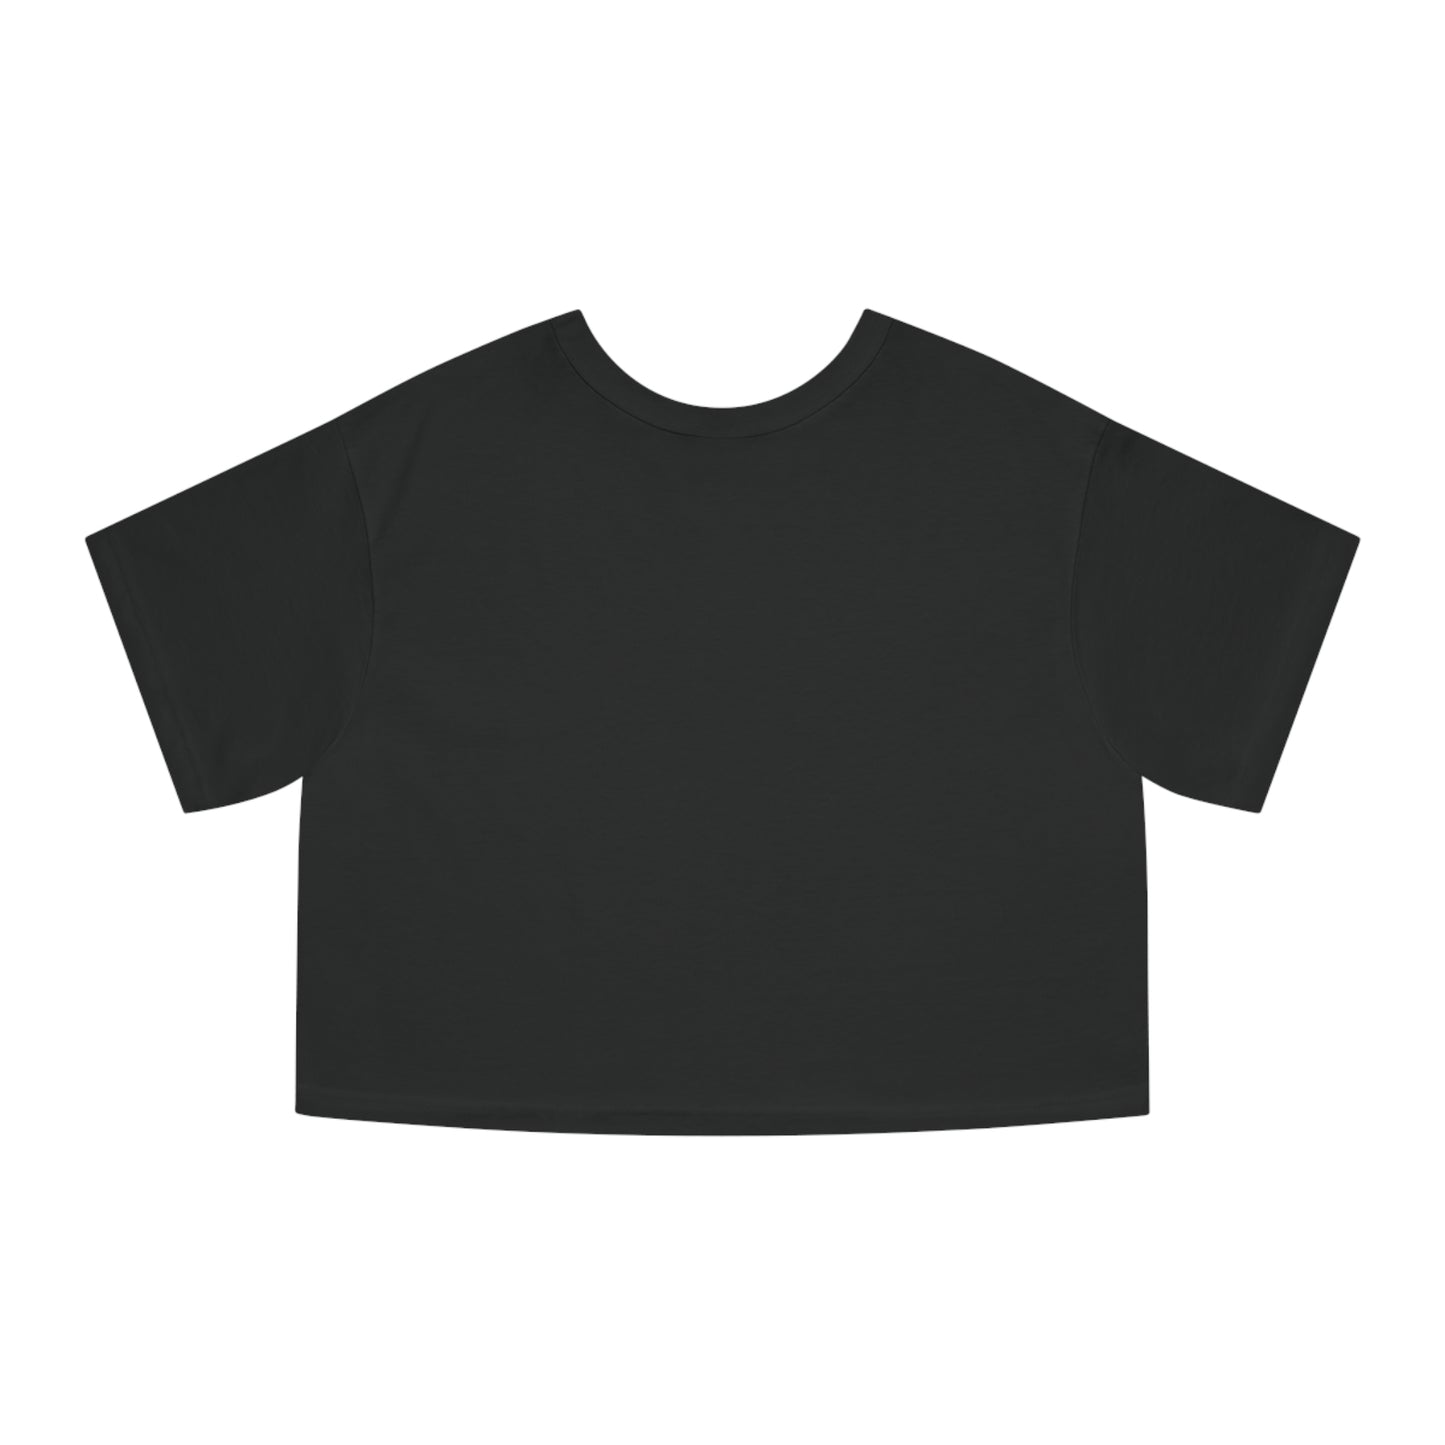 Heavy Metal Cropped T-Shirt